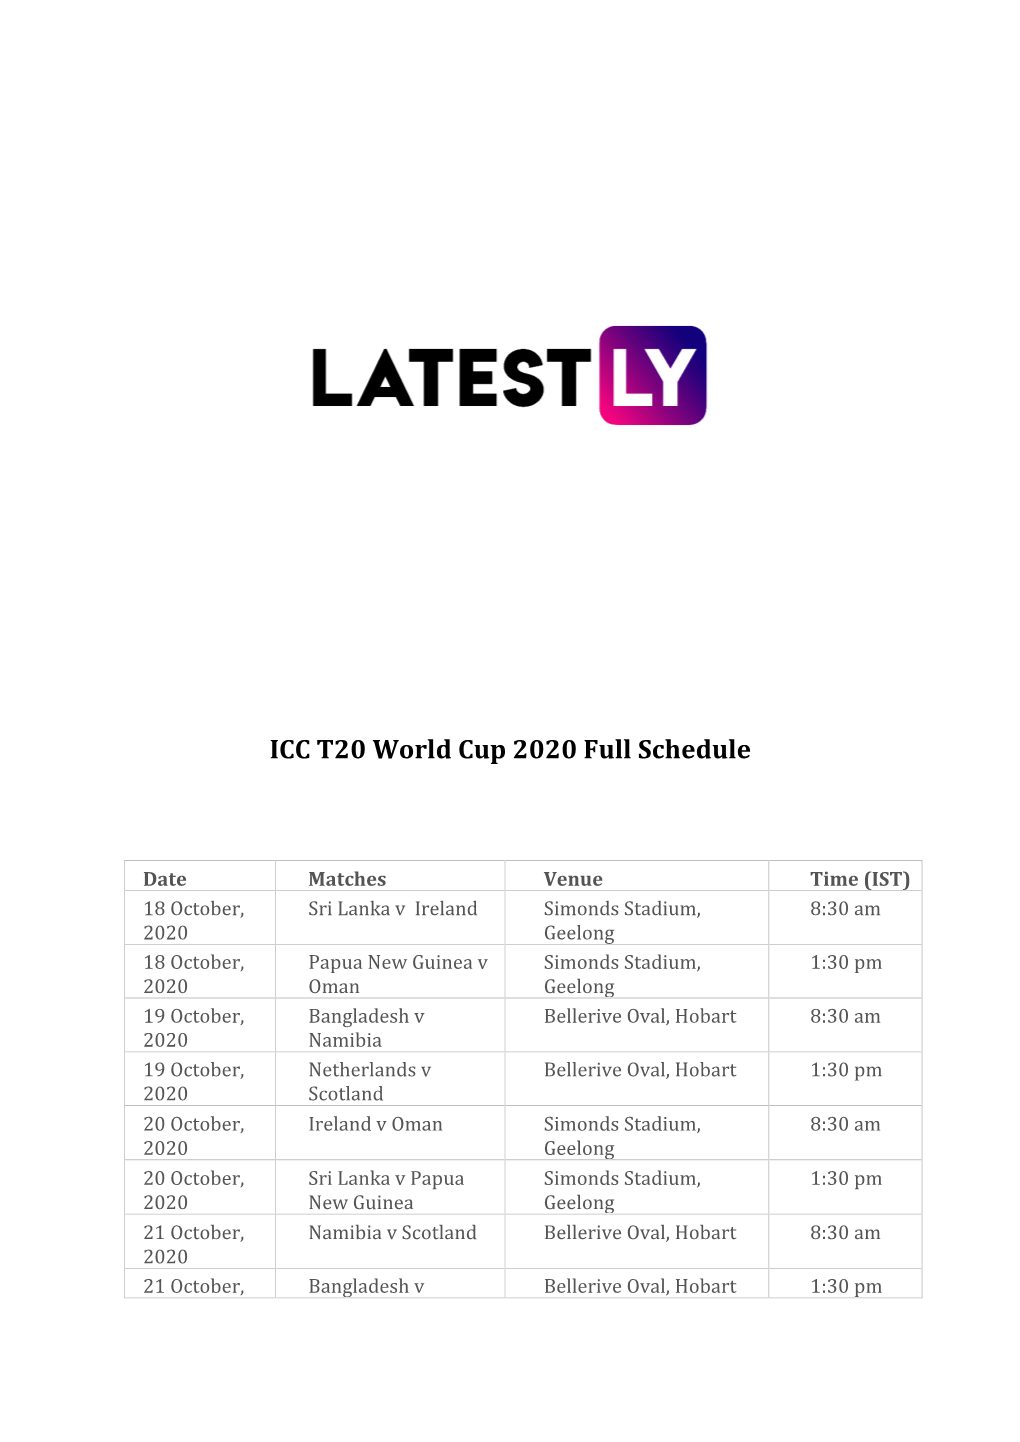 ICC T20 World Cup 2020 Full Schedule